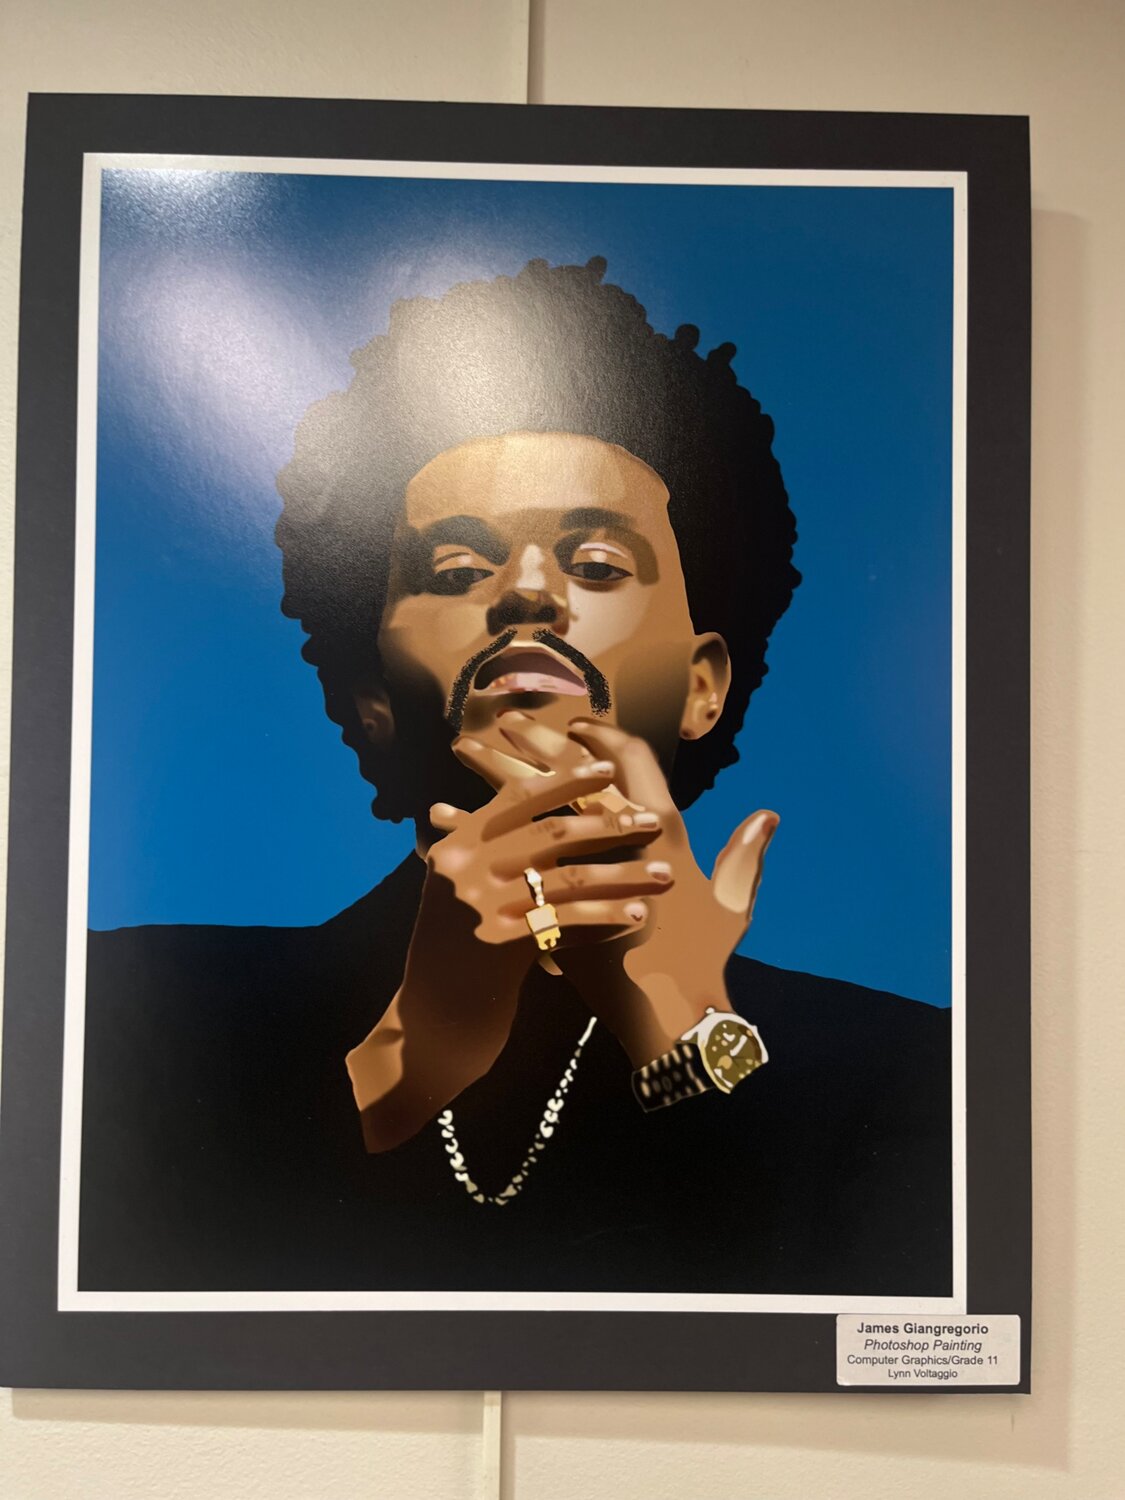 A digital portrait of The Weekend created by South Side High School junior James Giangregorio is one of the many highlights from the exhibition.